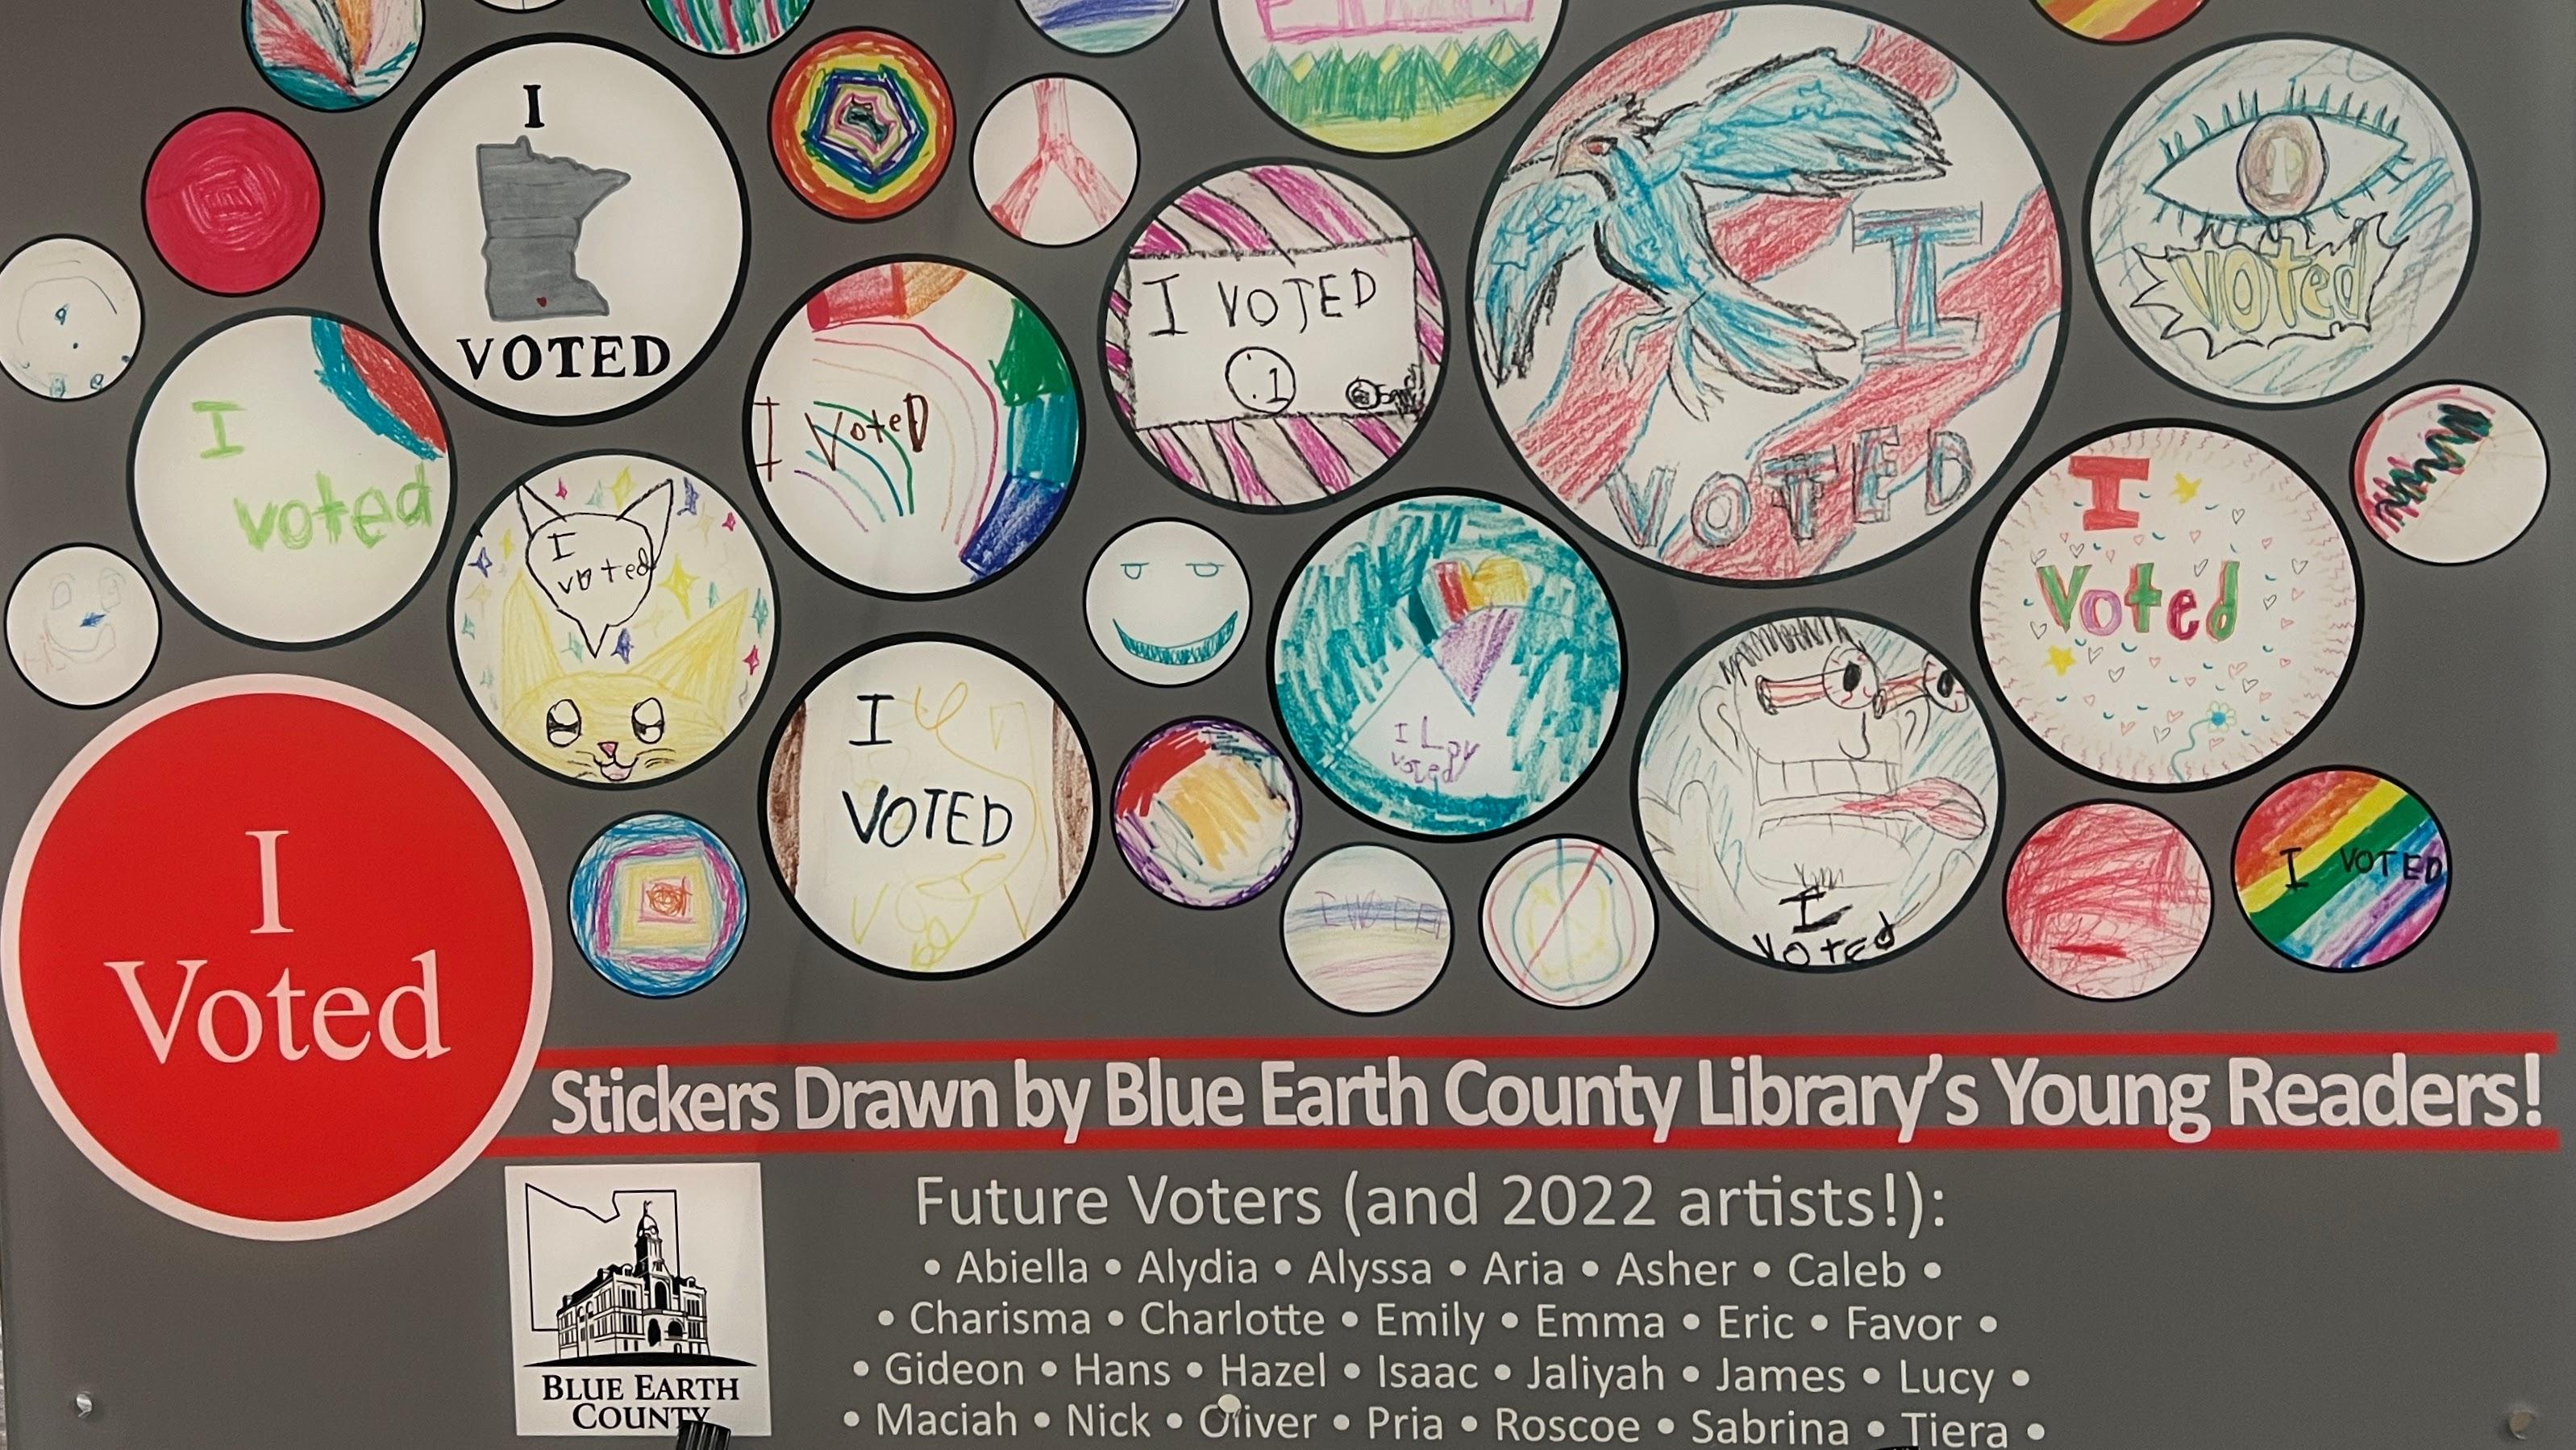 "I Voted" stickers designed by children at Blue Earth County Library